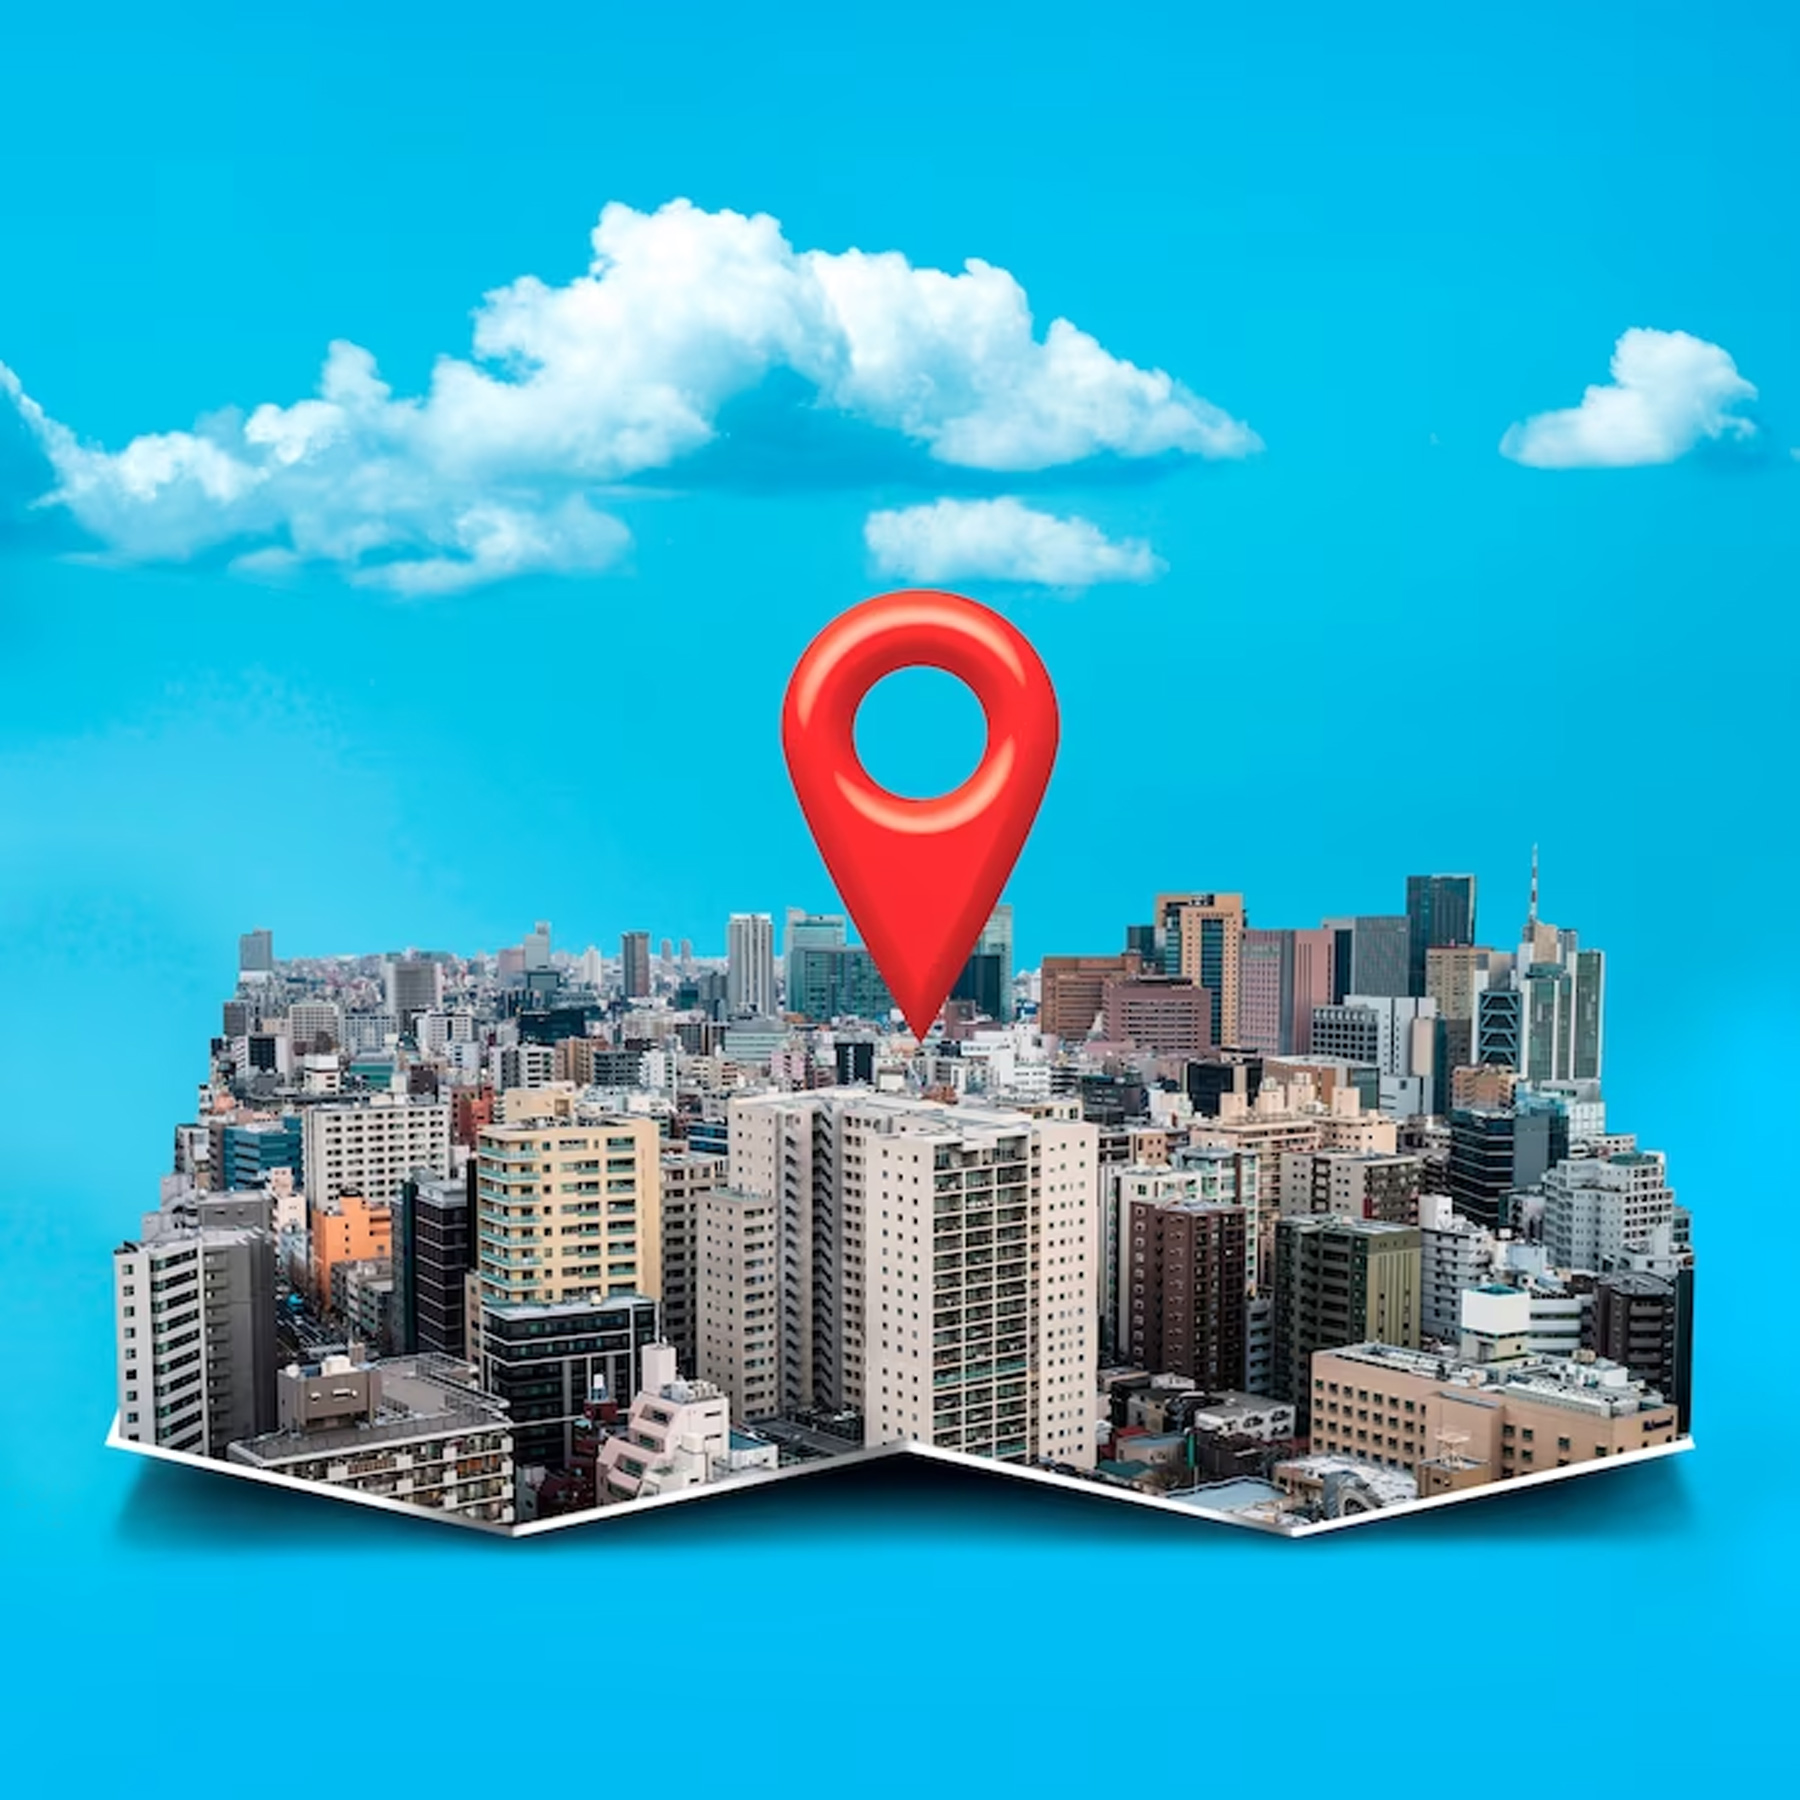 Why-Opt-for-Our-Local-SEO-Experts-in-London-local-seo-services-london-uk-webvizion